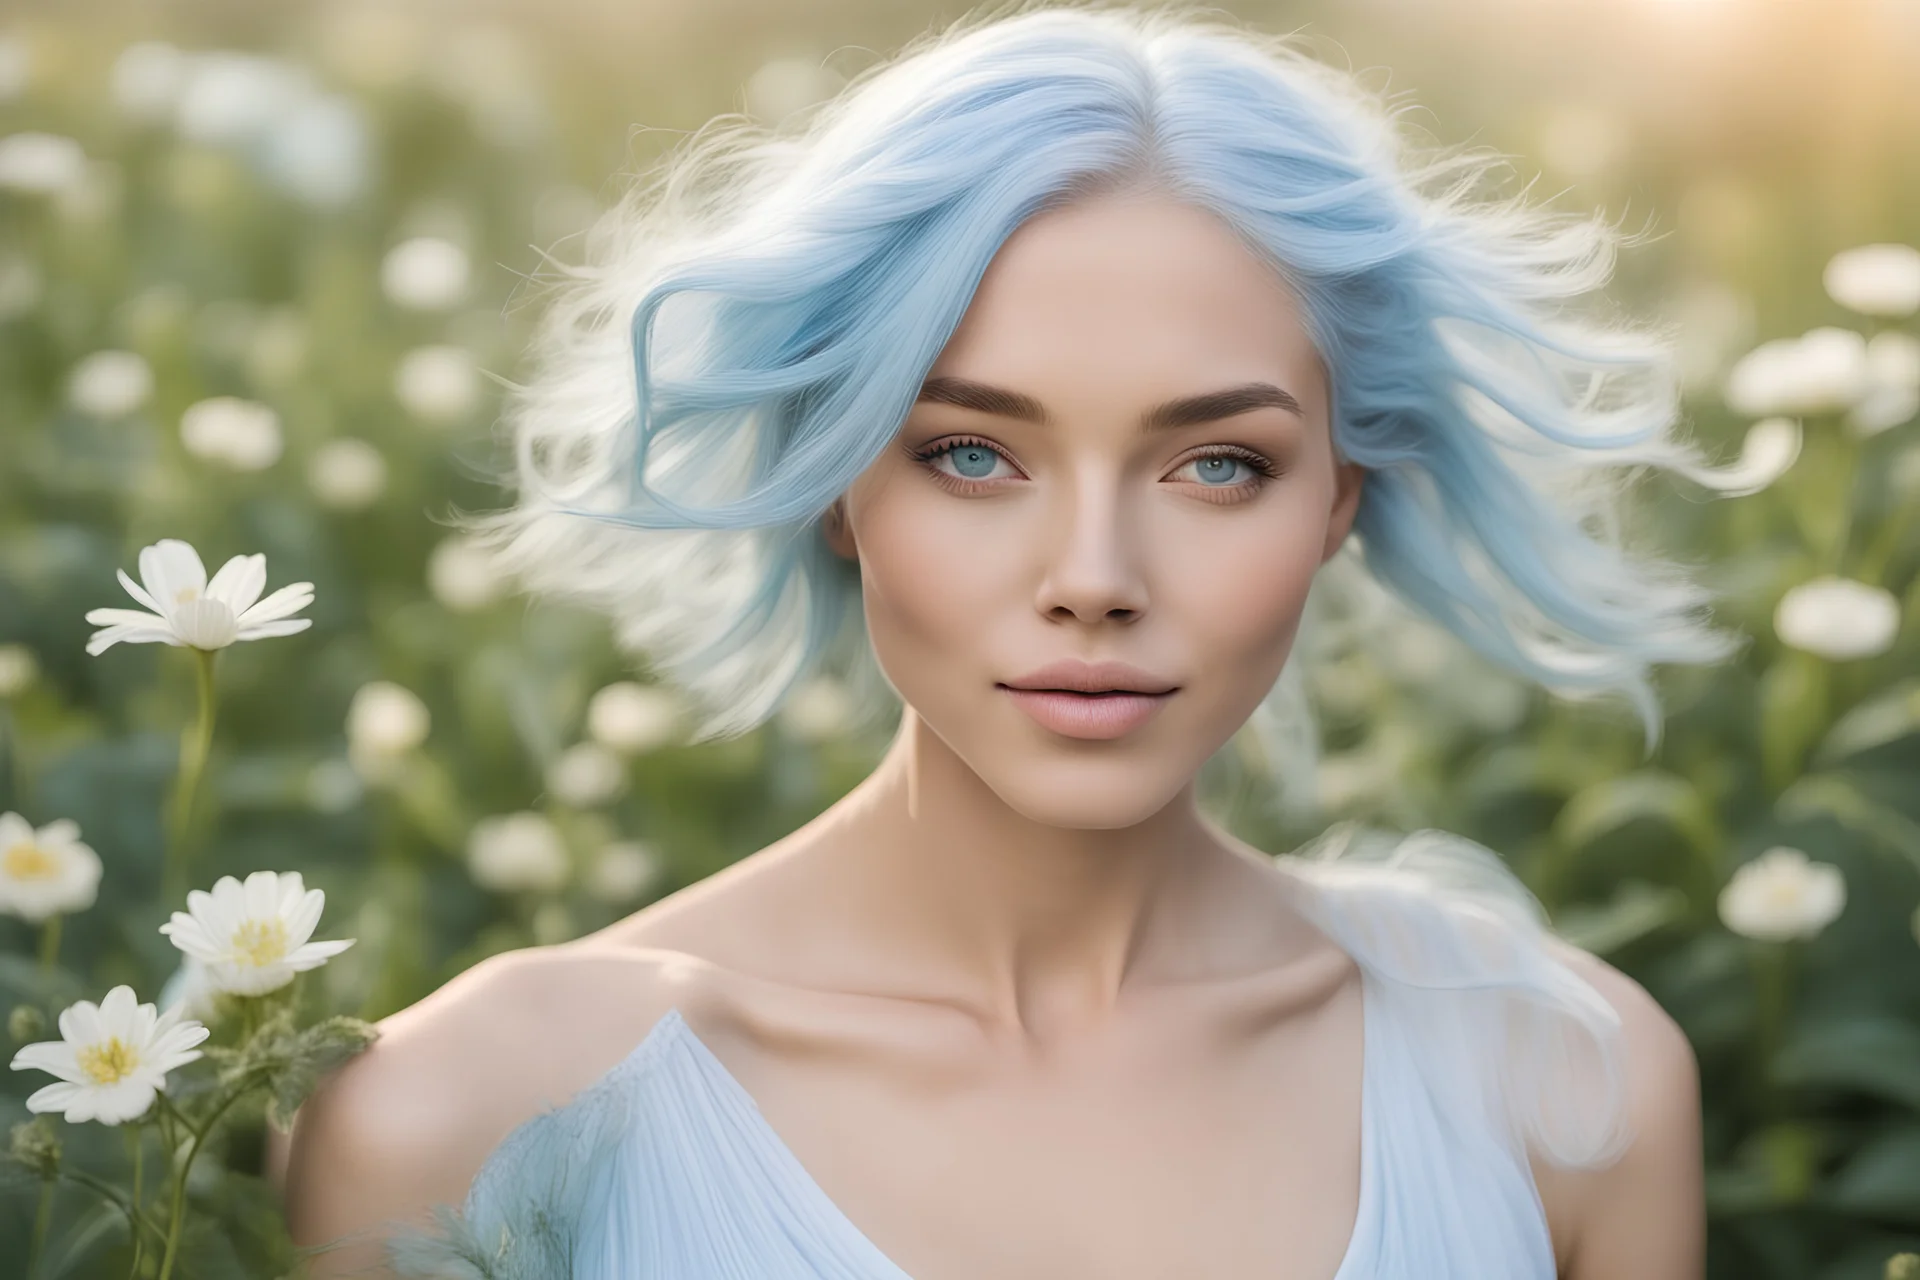 a beautiful woman with all defined parts of body. perfect face, hands, light blu hair, that represents freedom, lightness simplicity, love is pure and delicate and leaves room for Trust. there is also chicory bach flower in the lanpscape